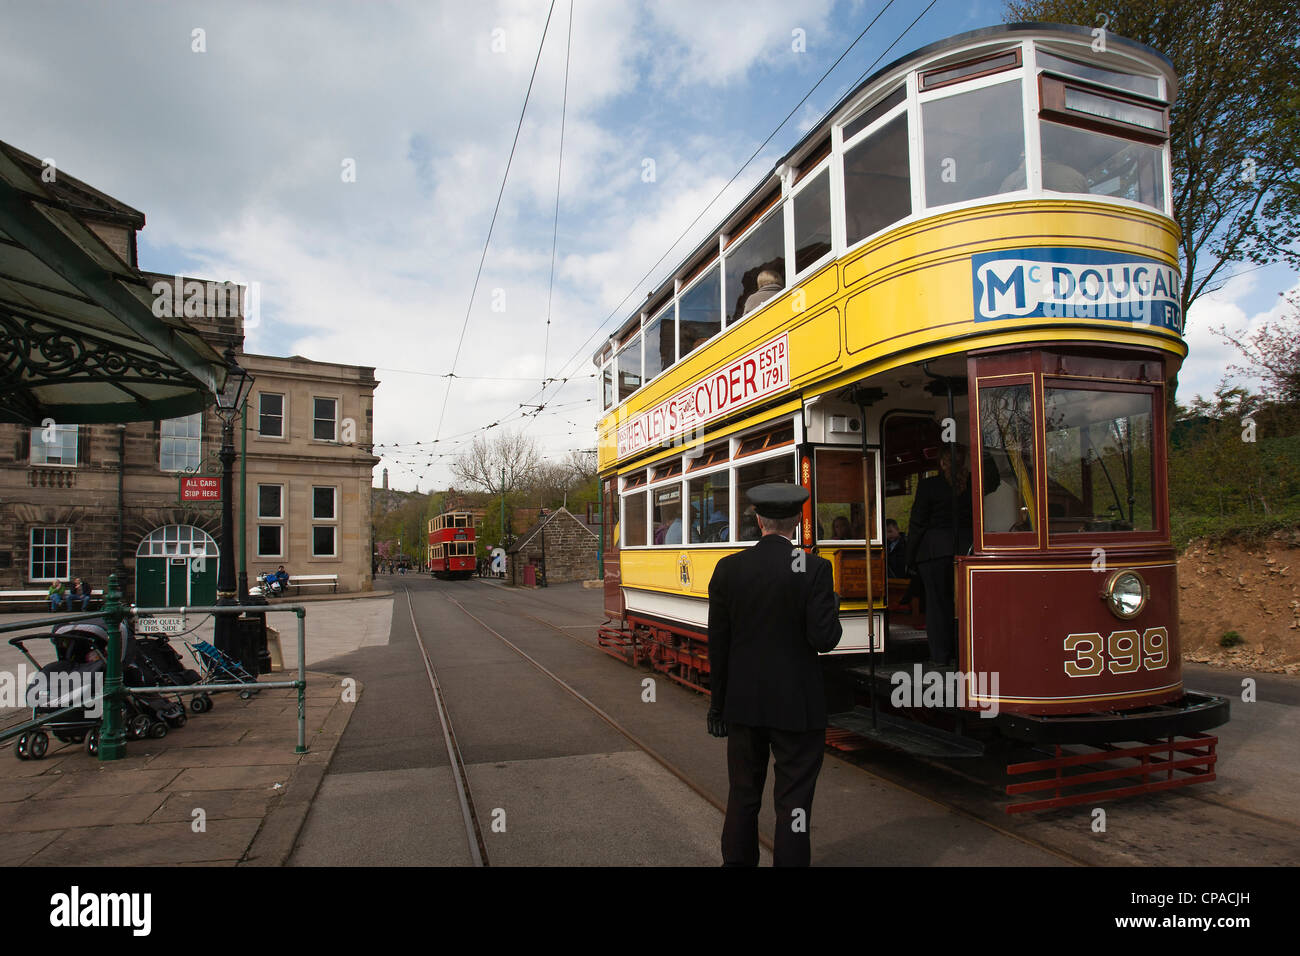 Leeds 399 Tram at the National Tramway Village Museum, Crich, Derbyshire, UK Stock Photo